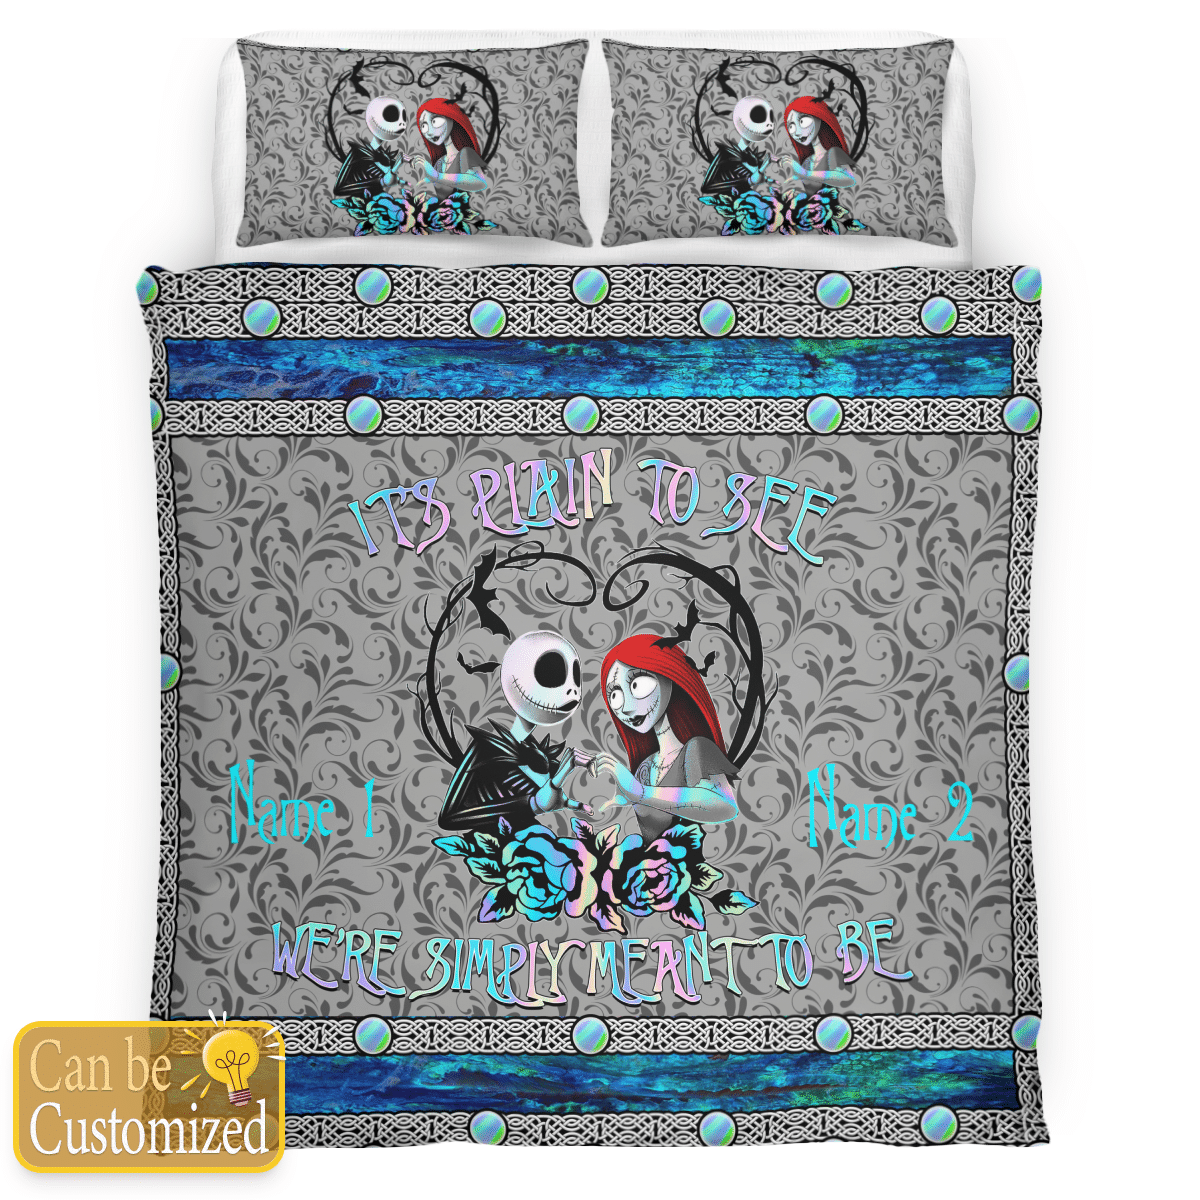 Personalized We're Simply Meant To Be Bedding Set